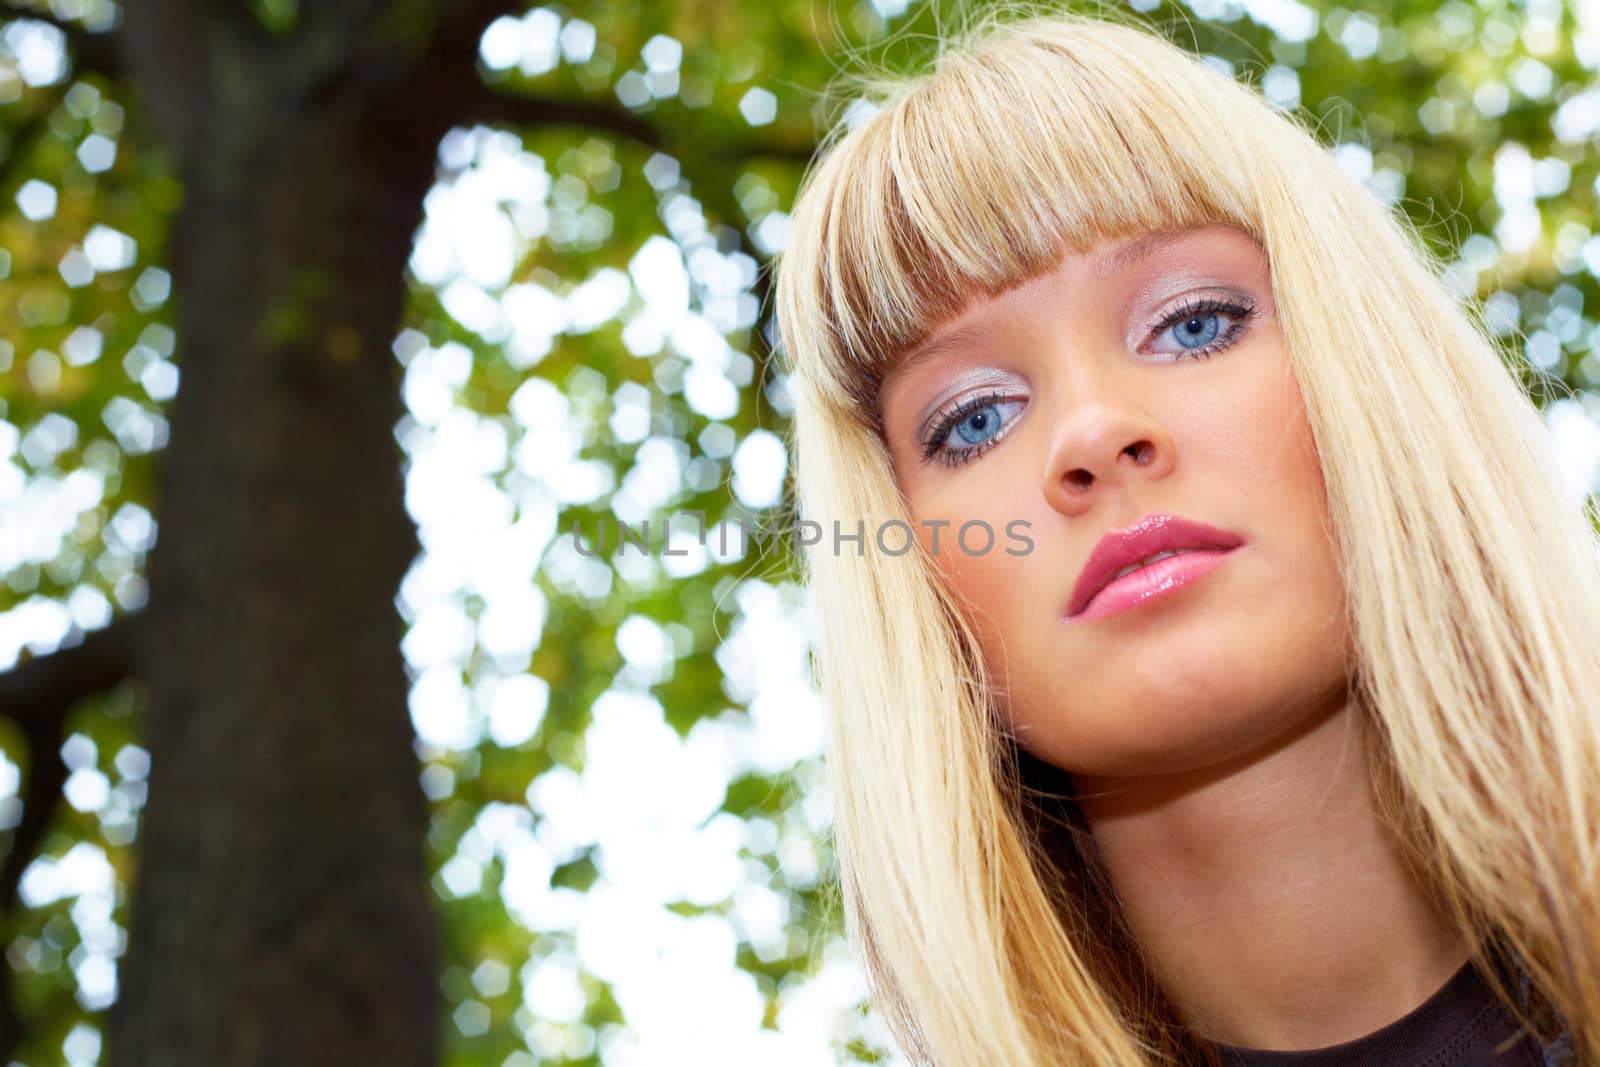 Low angle view of young woman by tree, looking at camera